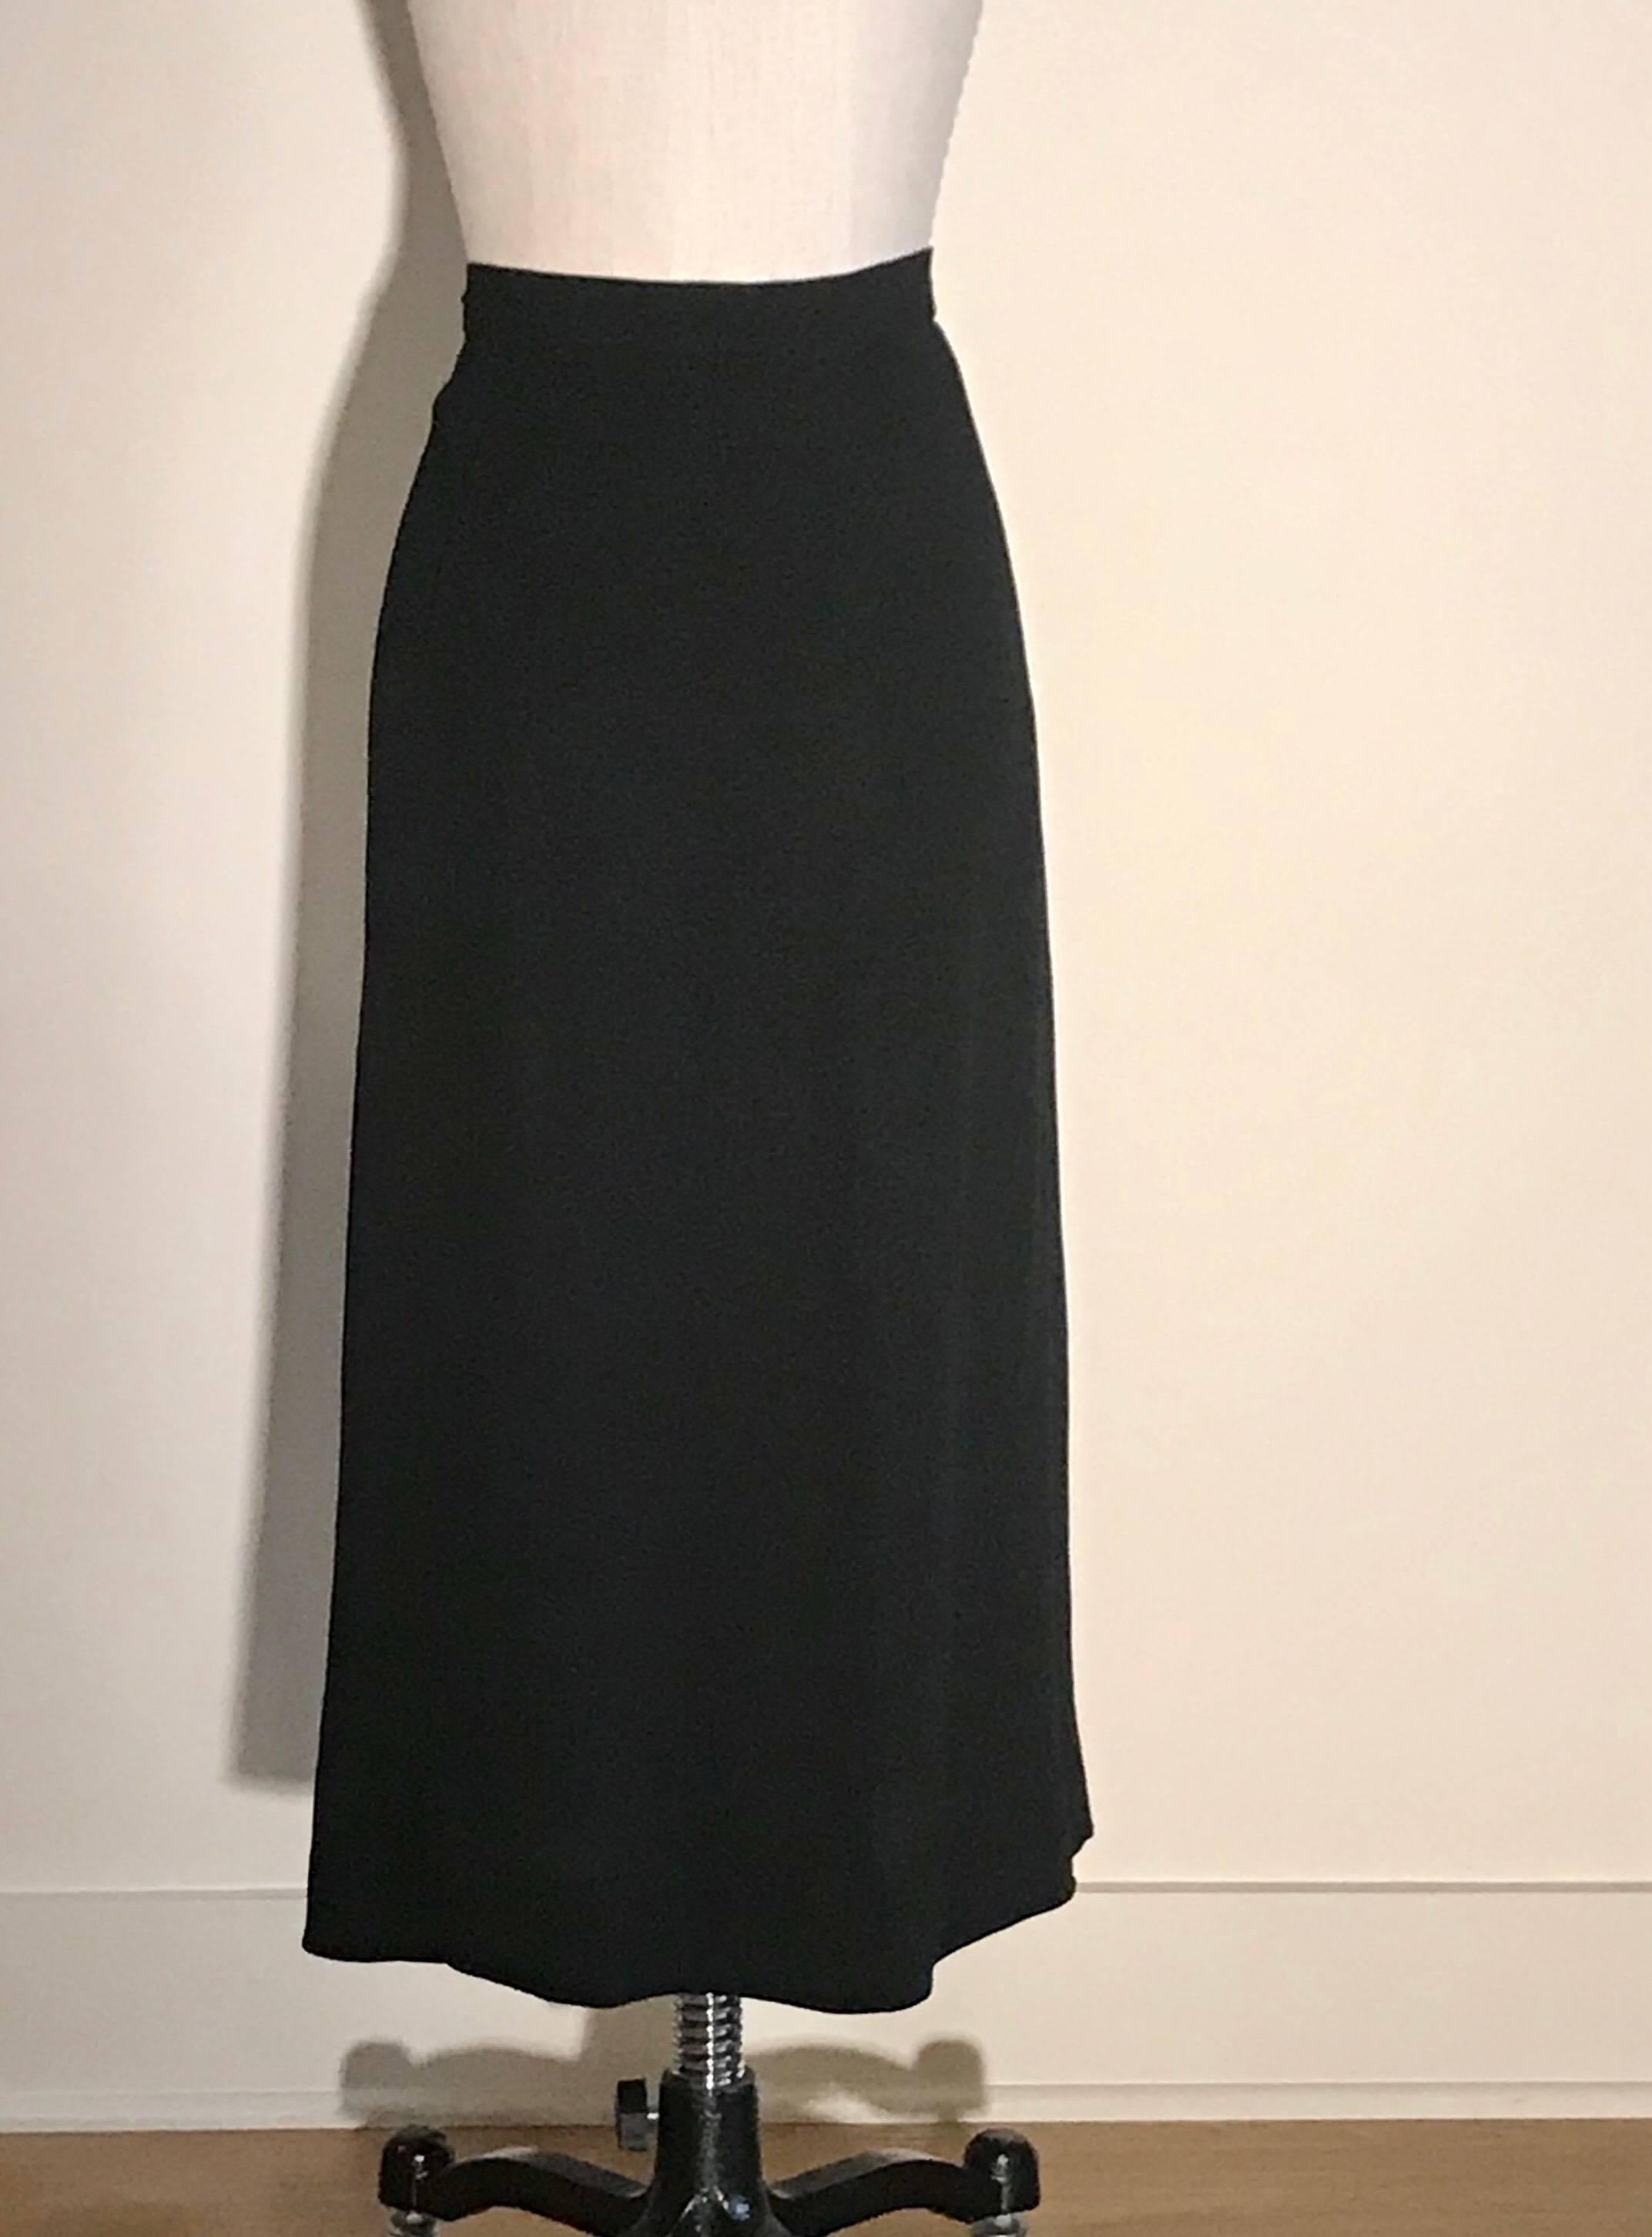 Stunning 1940s Mainbocher Inc black skirt in a lightweight fabric (seems like a light wool crepe) with a plethora of tassels in a chevron pattern at front waist. Side zip with snaps and hook and eyes at waist. 

(Decade is a guess; We initially